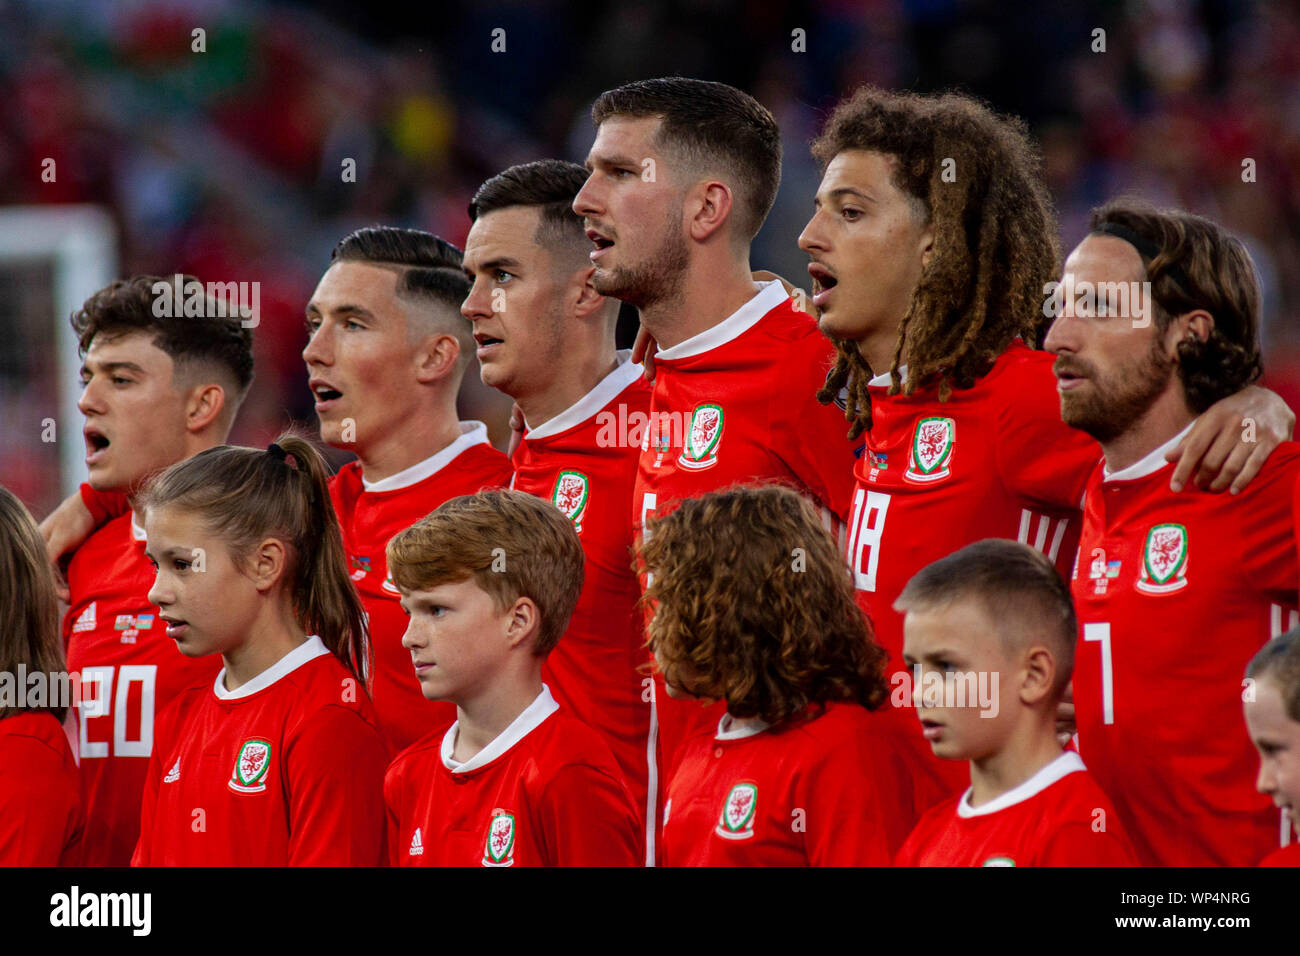 Wales perform the National Anthem. Wales v Azerbaijan UEFA Euro 2020 Qualifier at the Cardiff City Stadium. Lewis Mitchell/YCPD. Stock Photo